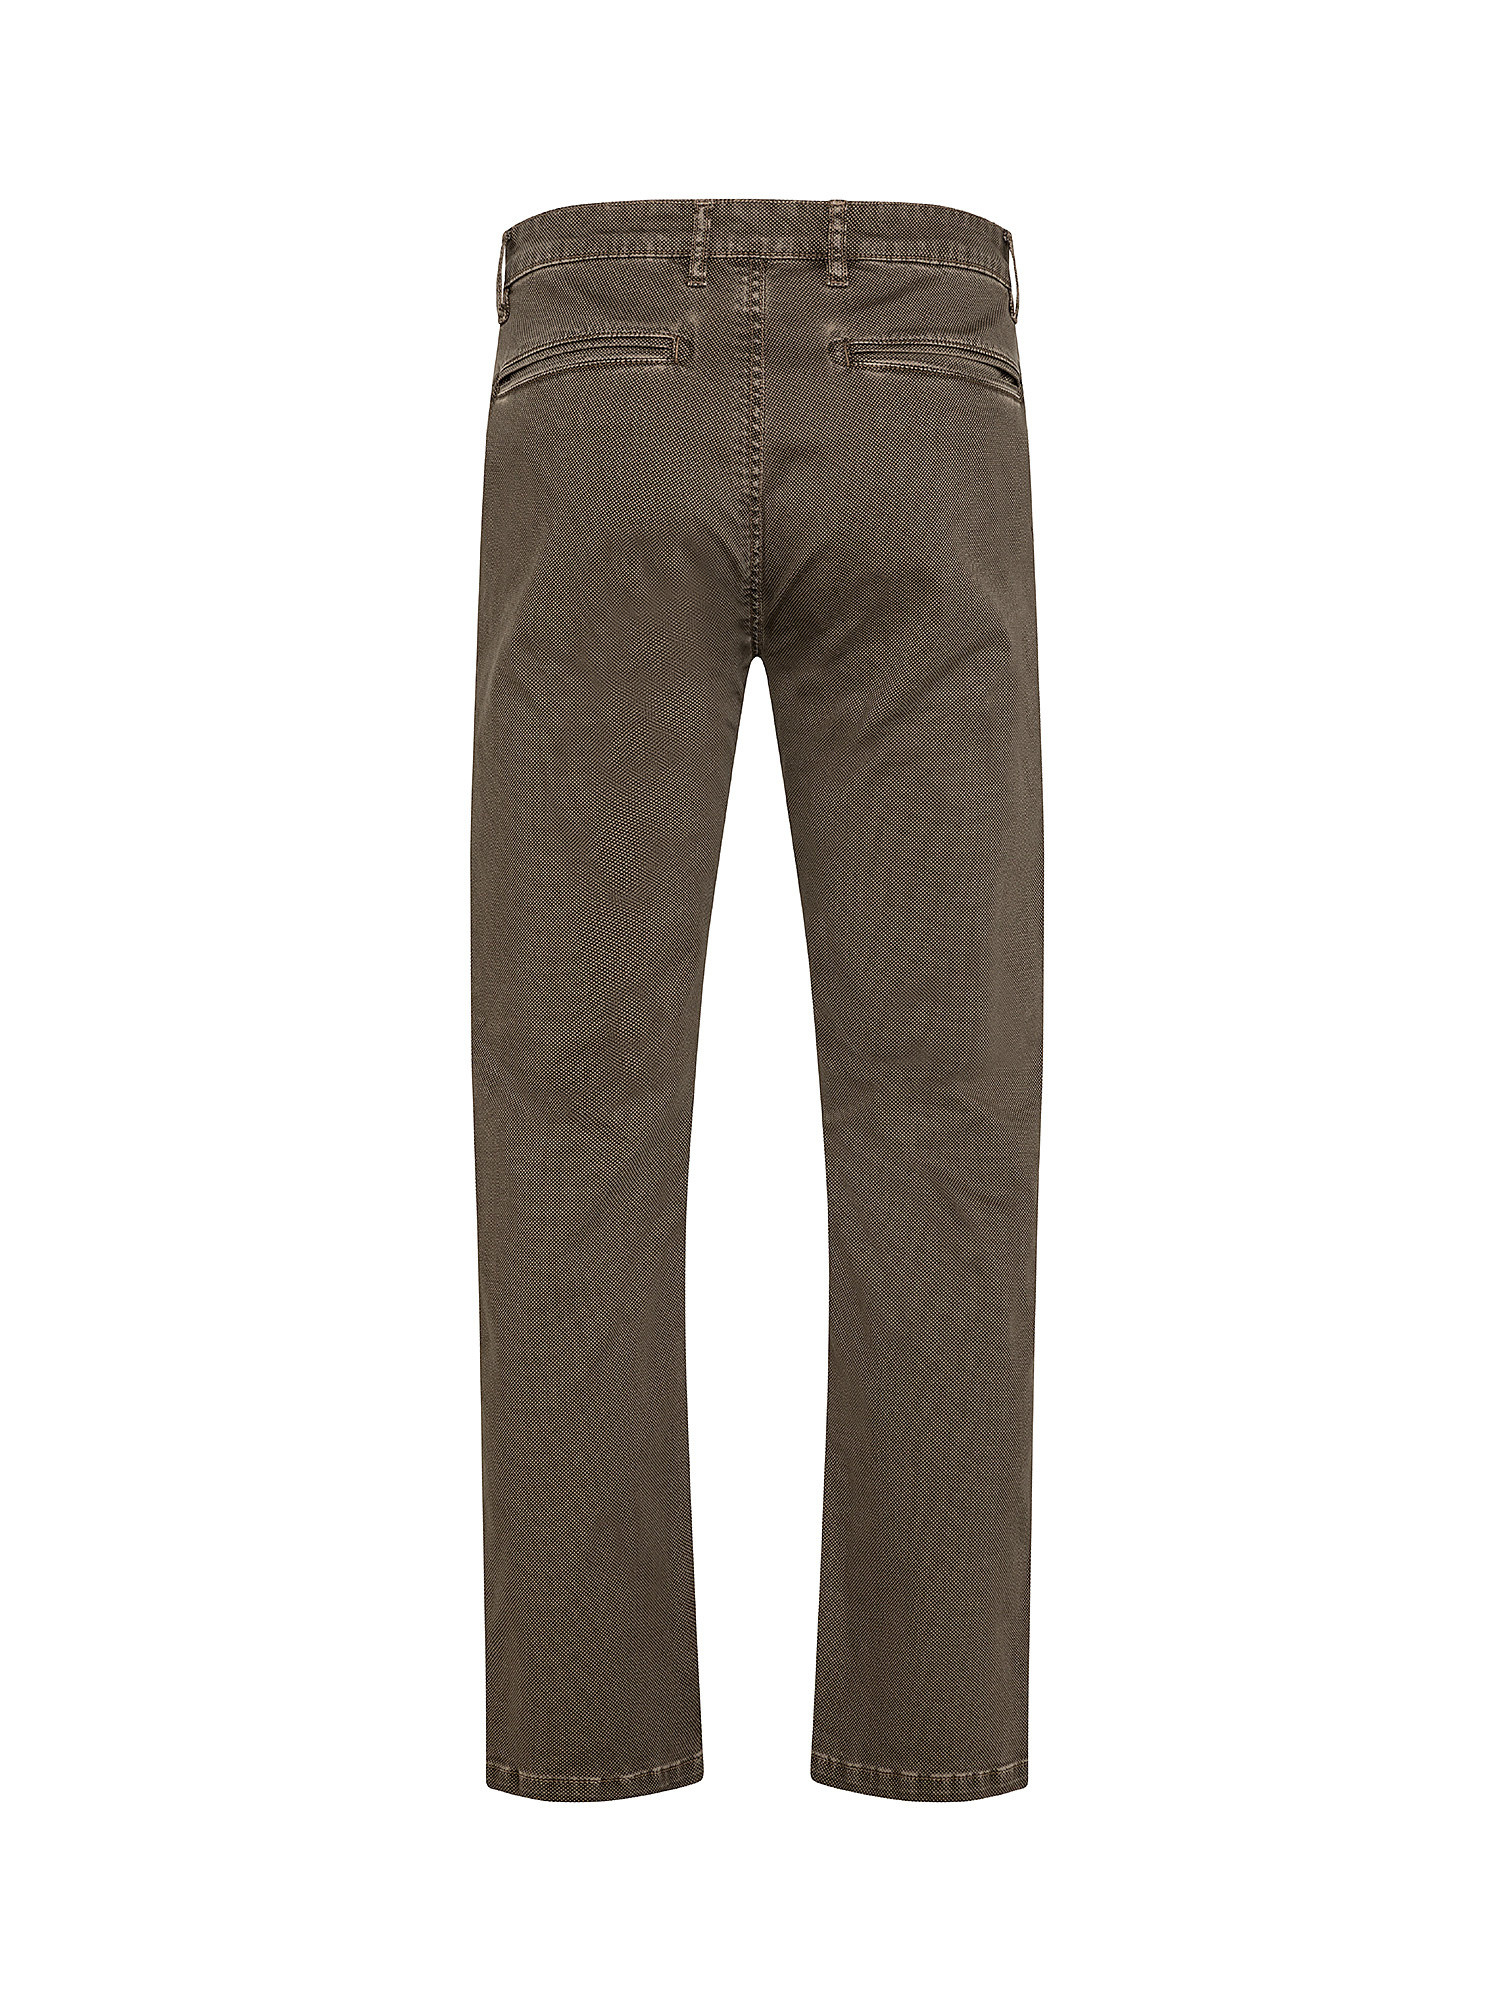 Stretch cotton chinos trousers, Brown, large image number 1